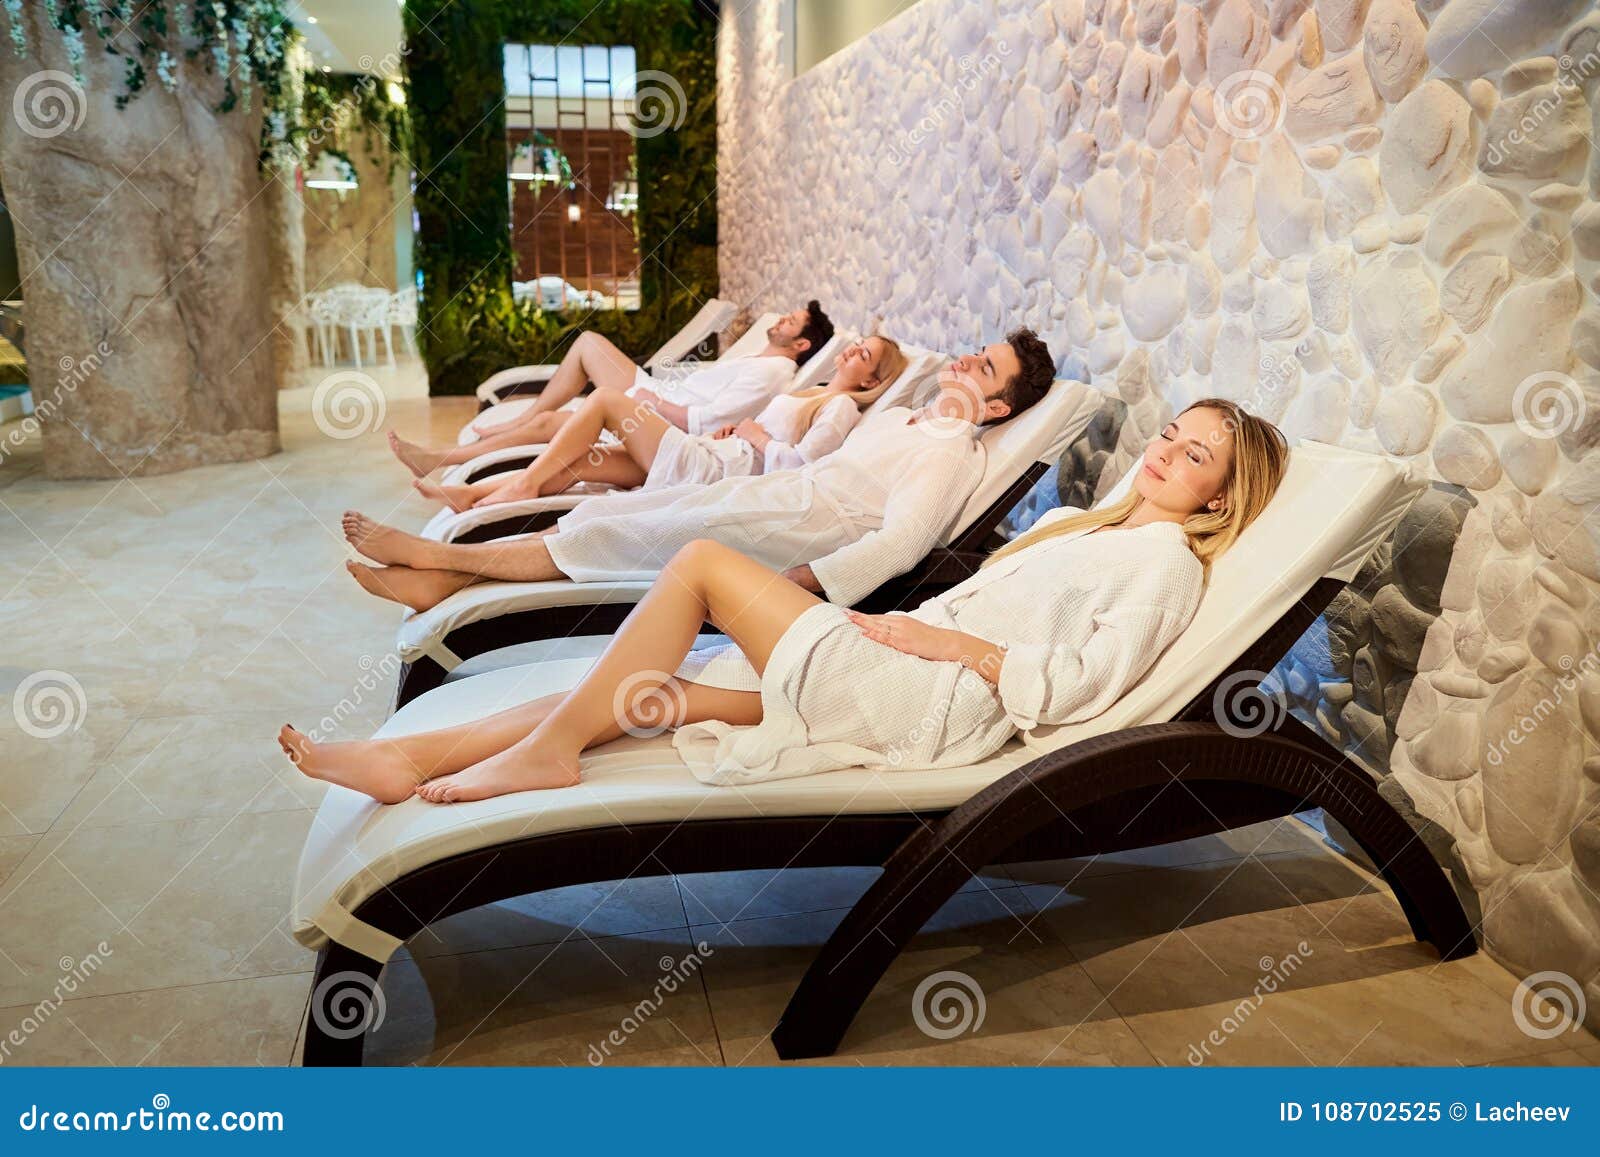 people in bathrobes are resting in the spa salon.